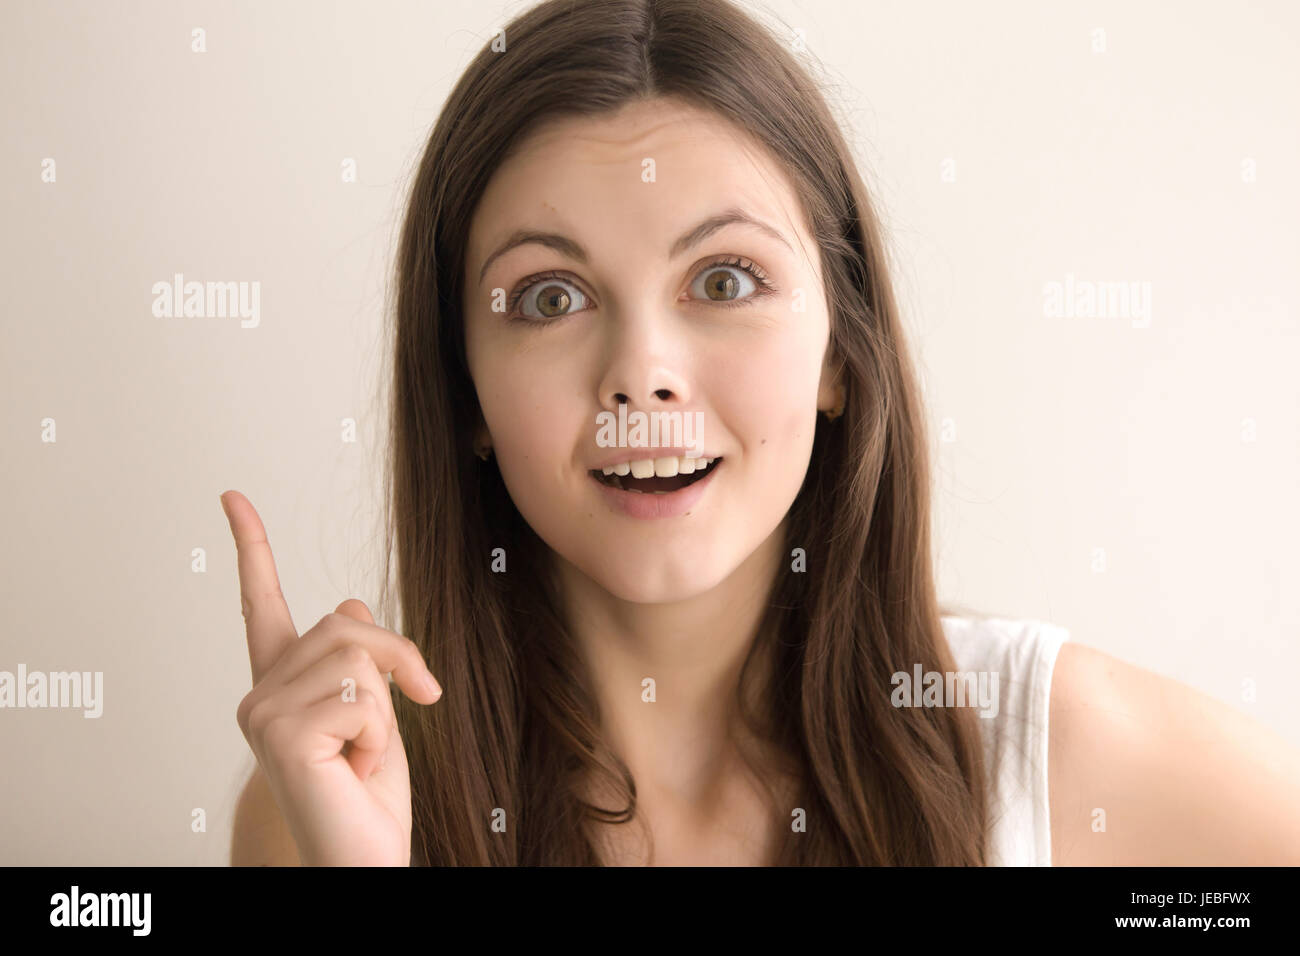 Headshot portrait of excited woman with great idea Stock Photo